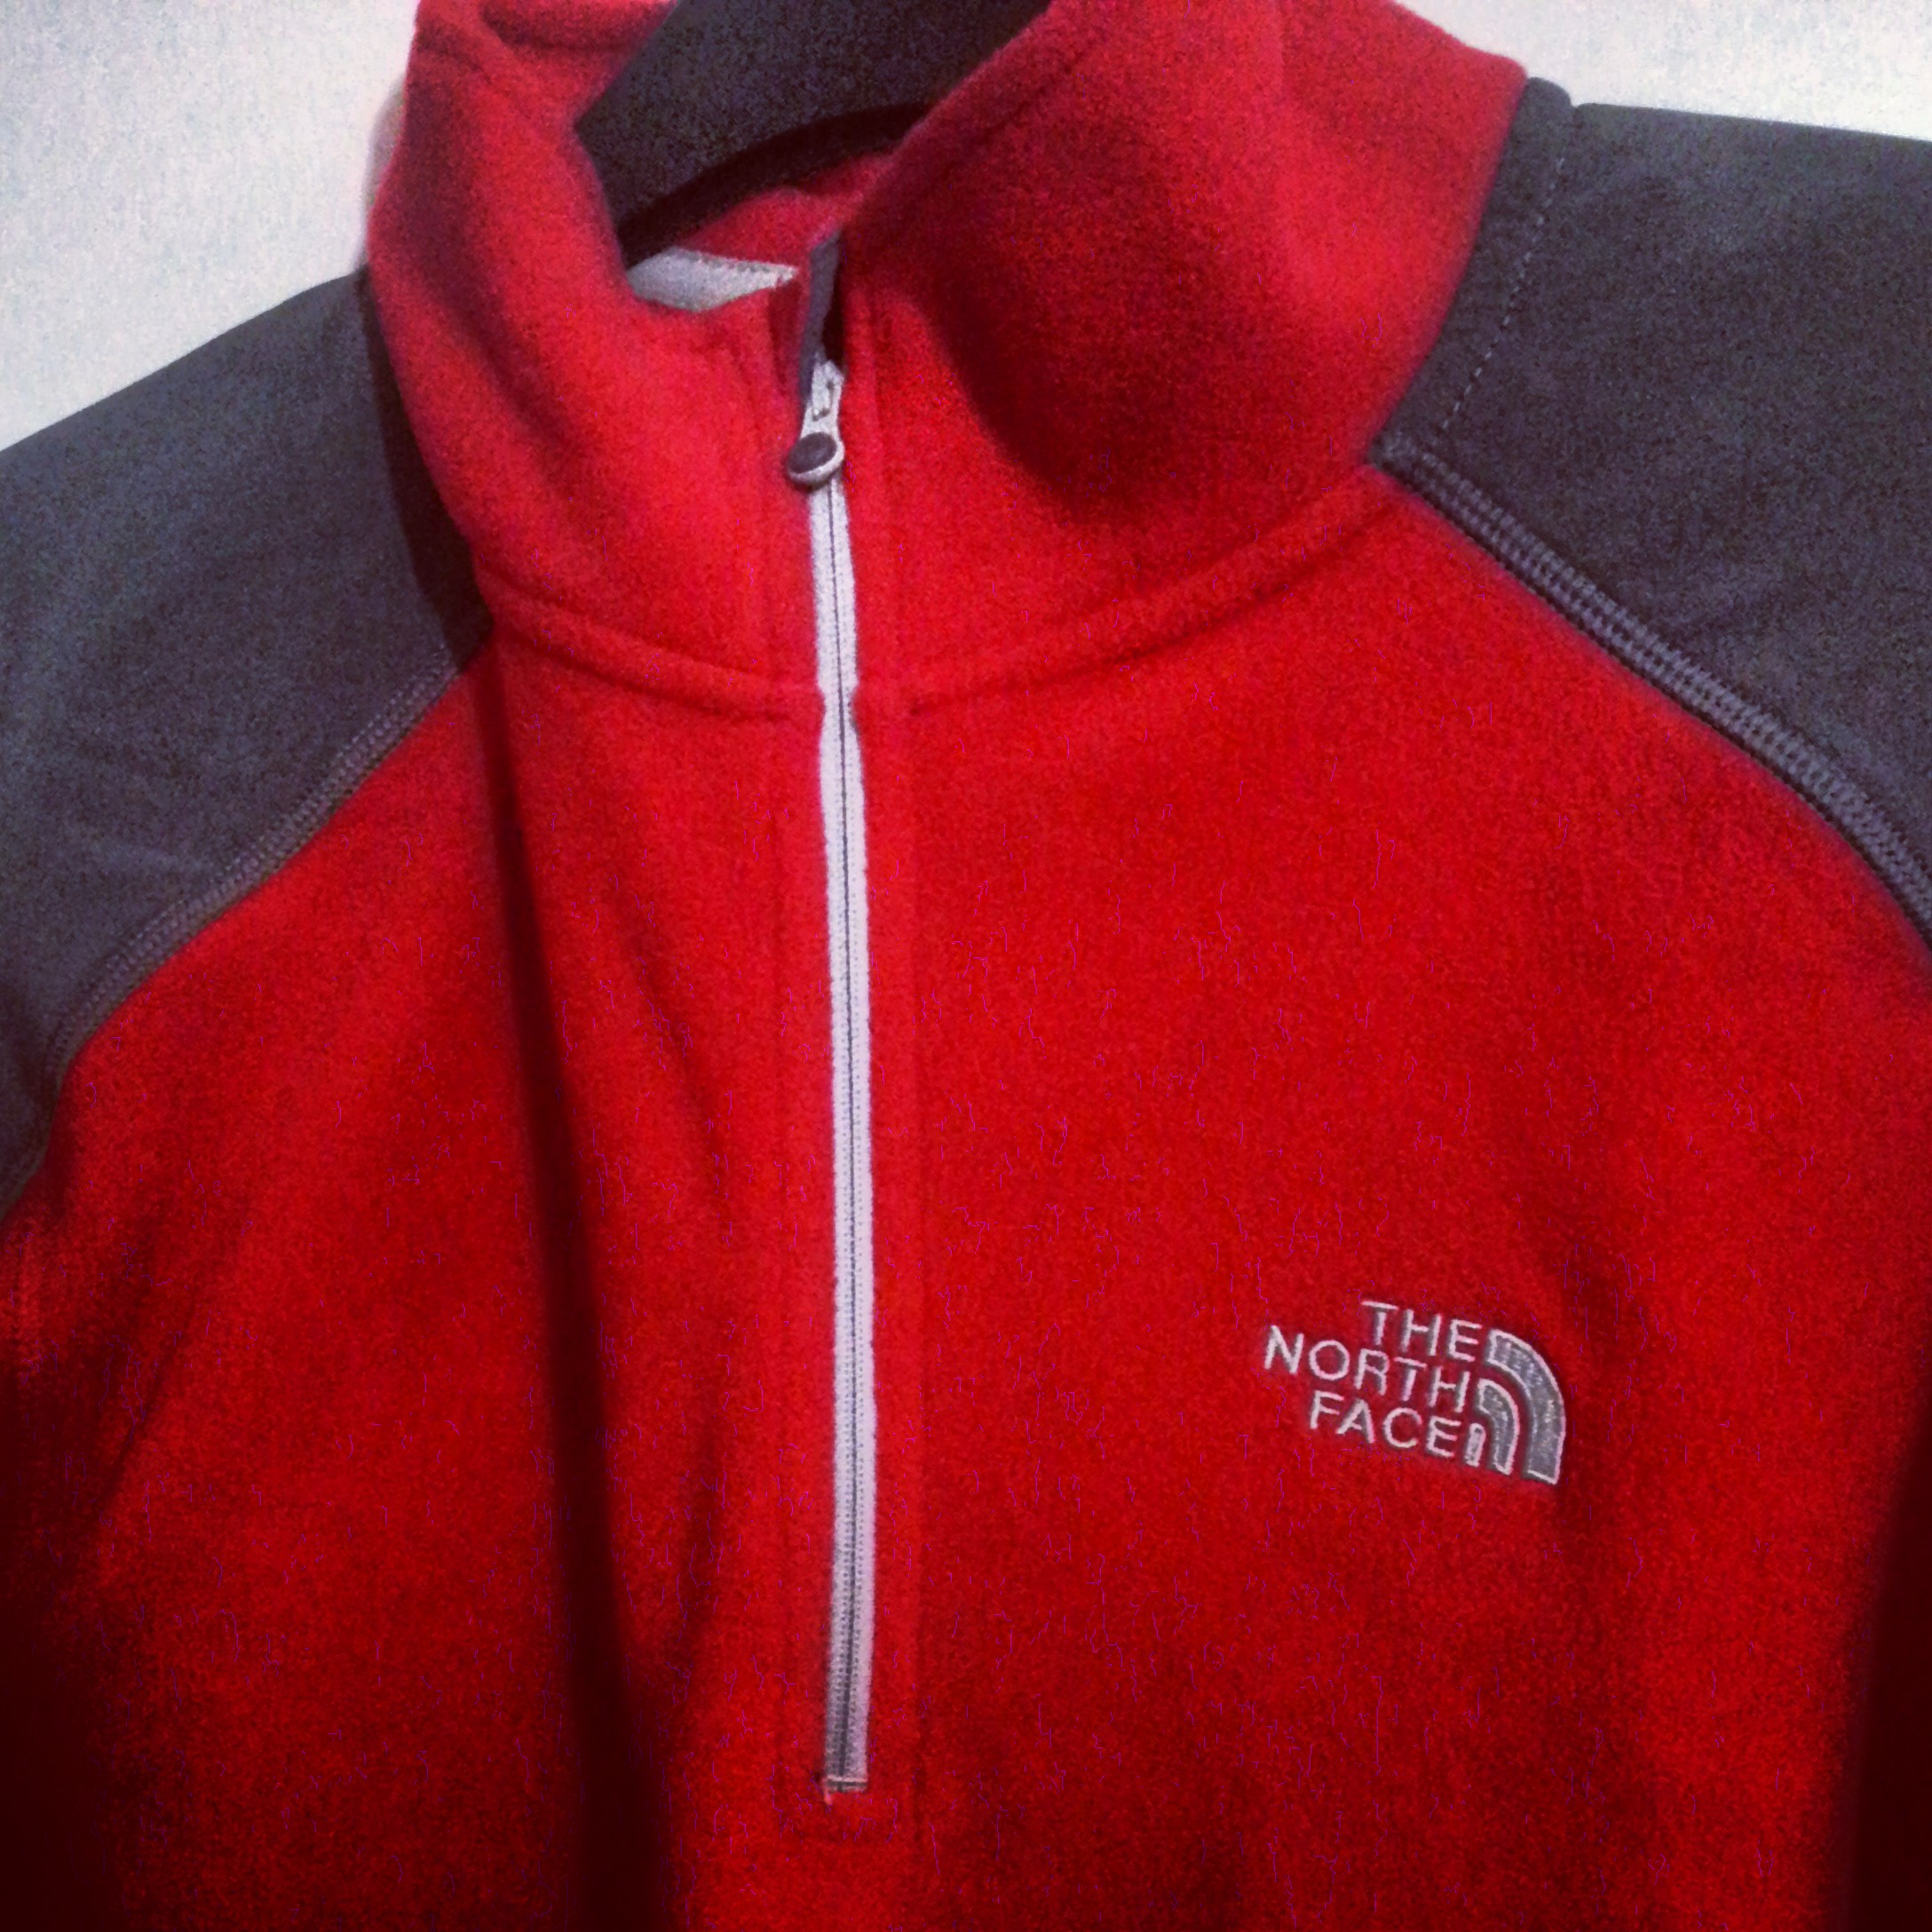 North Face = quality